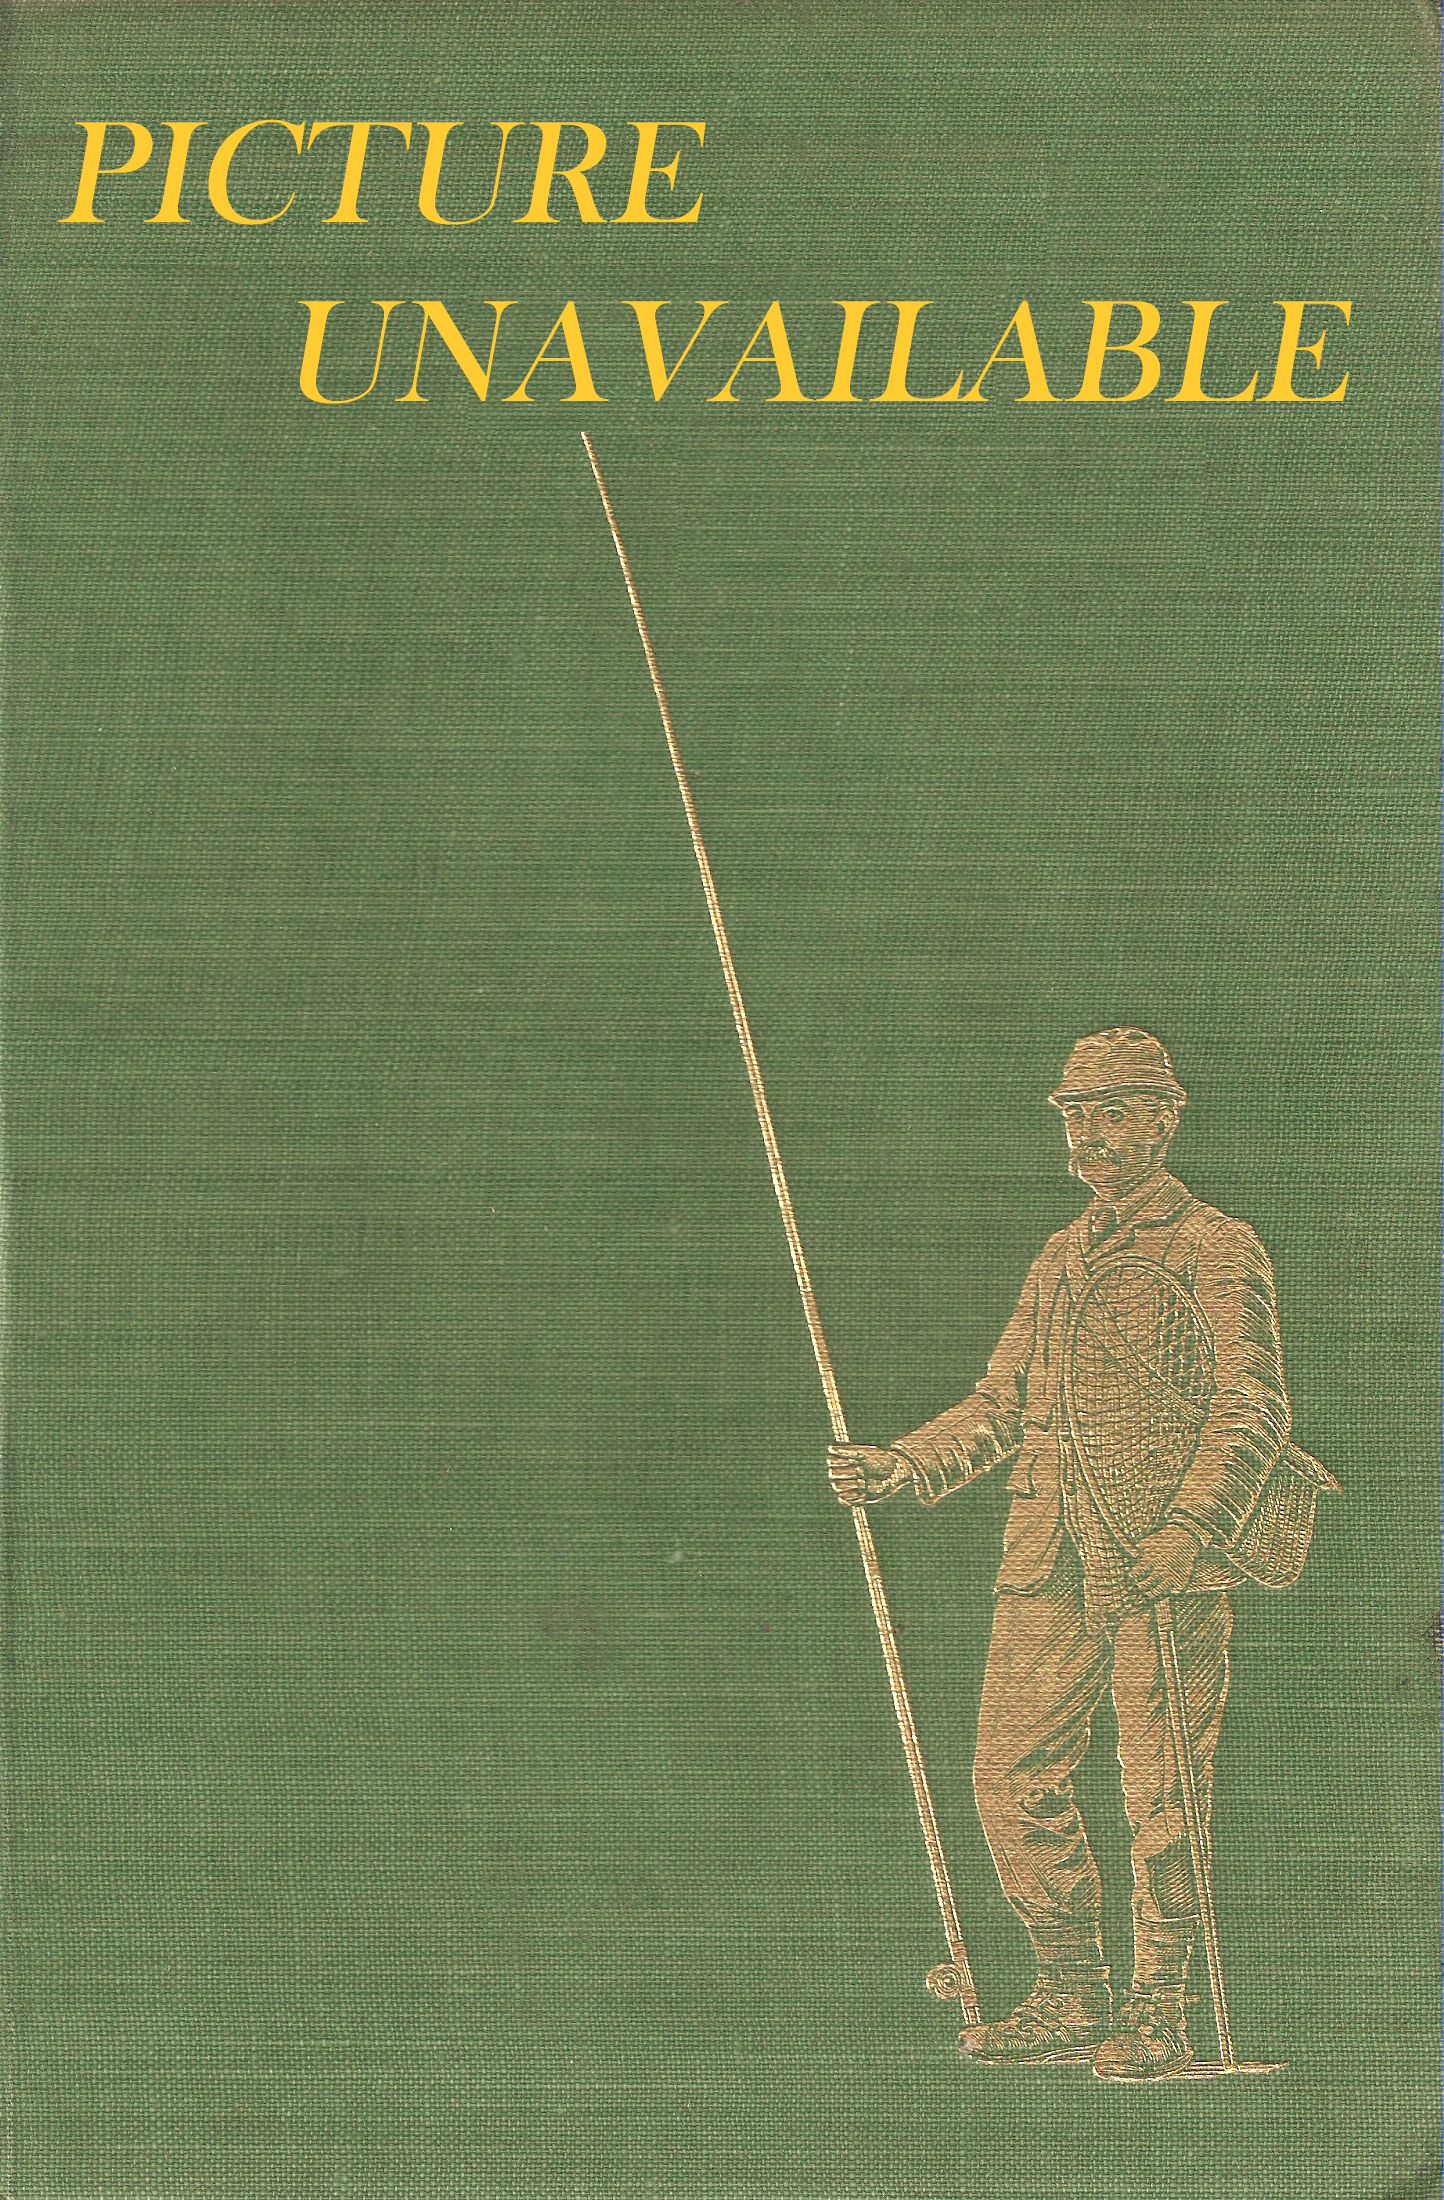 CANAL FISHING: A PRACTICAL GUIDE. By Dominic Garnett.